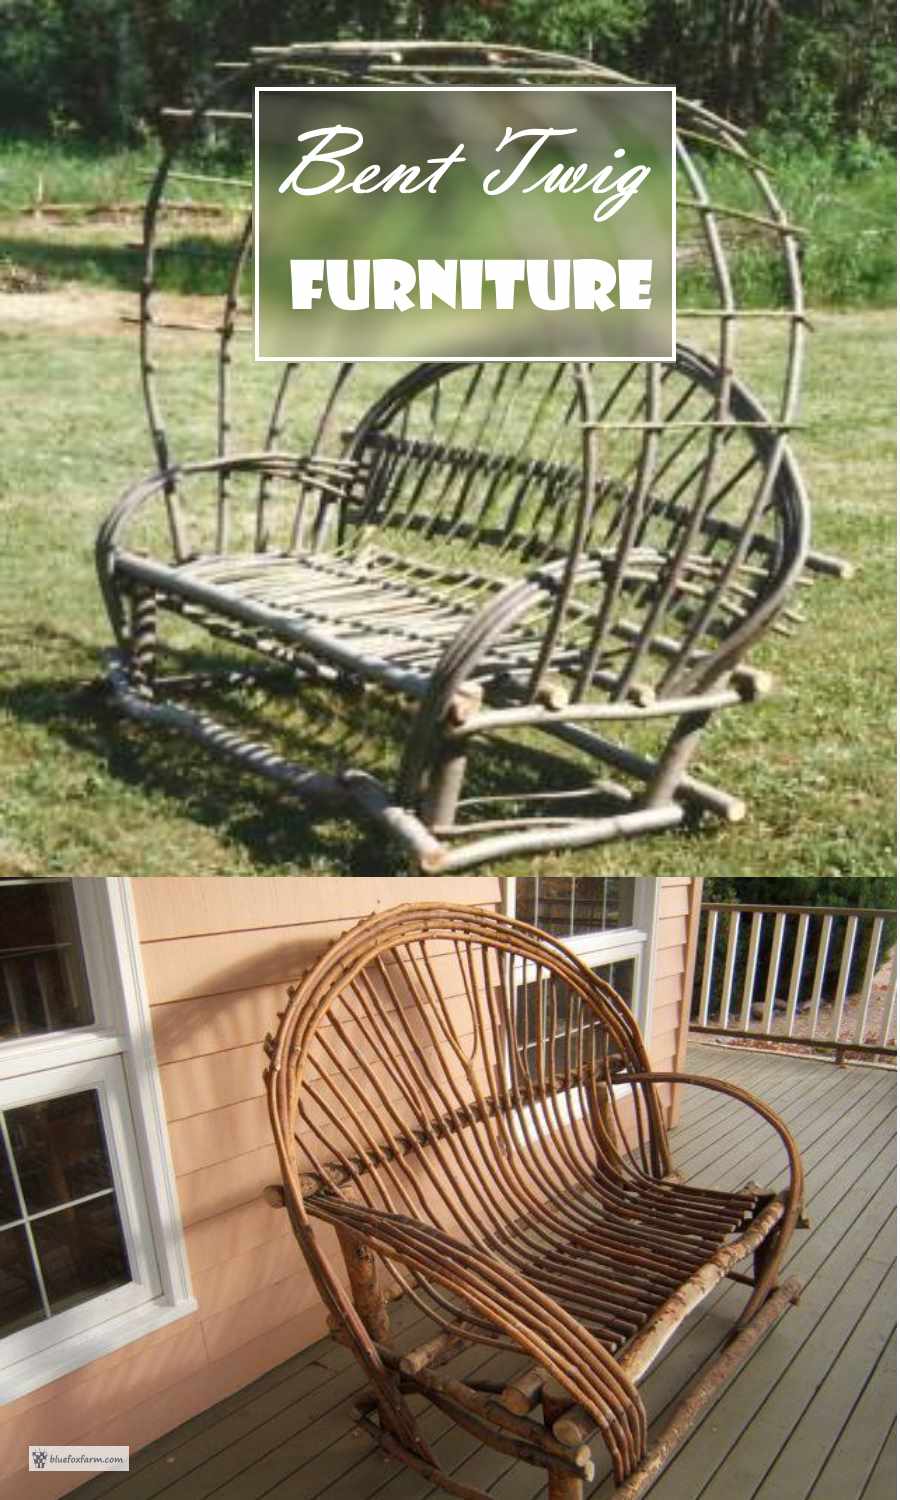 Bent Twig Furniture - classic and rustic...